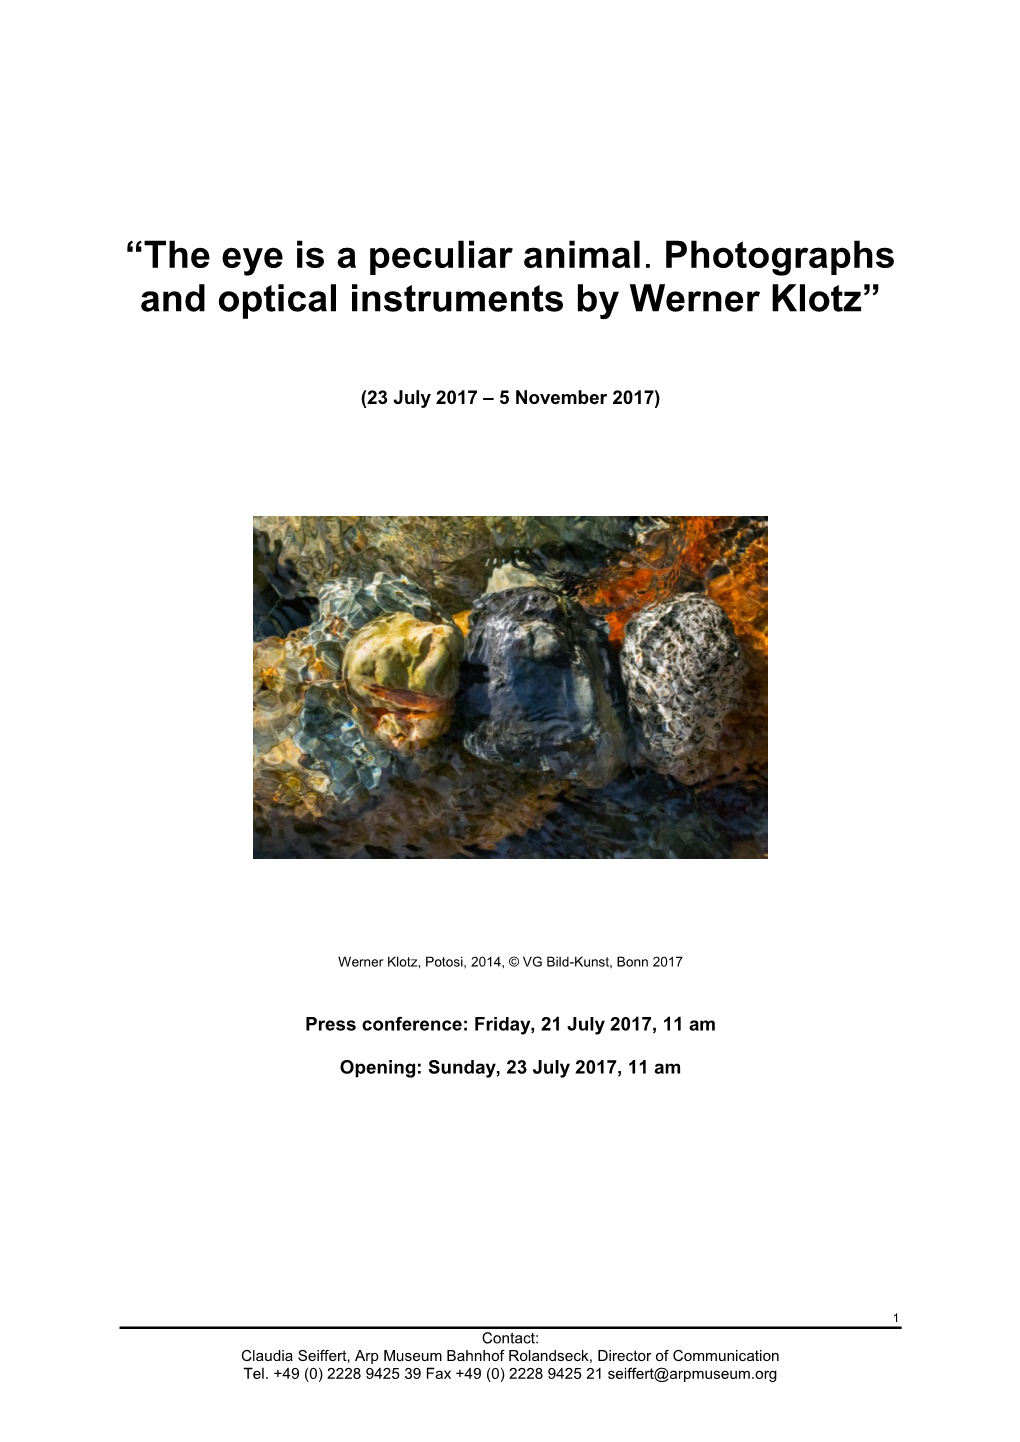 The Eye Is a Peculiar Animal. Photographs and Optical Instruments by Werner Klotz”